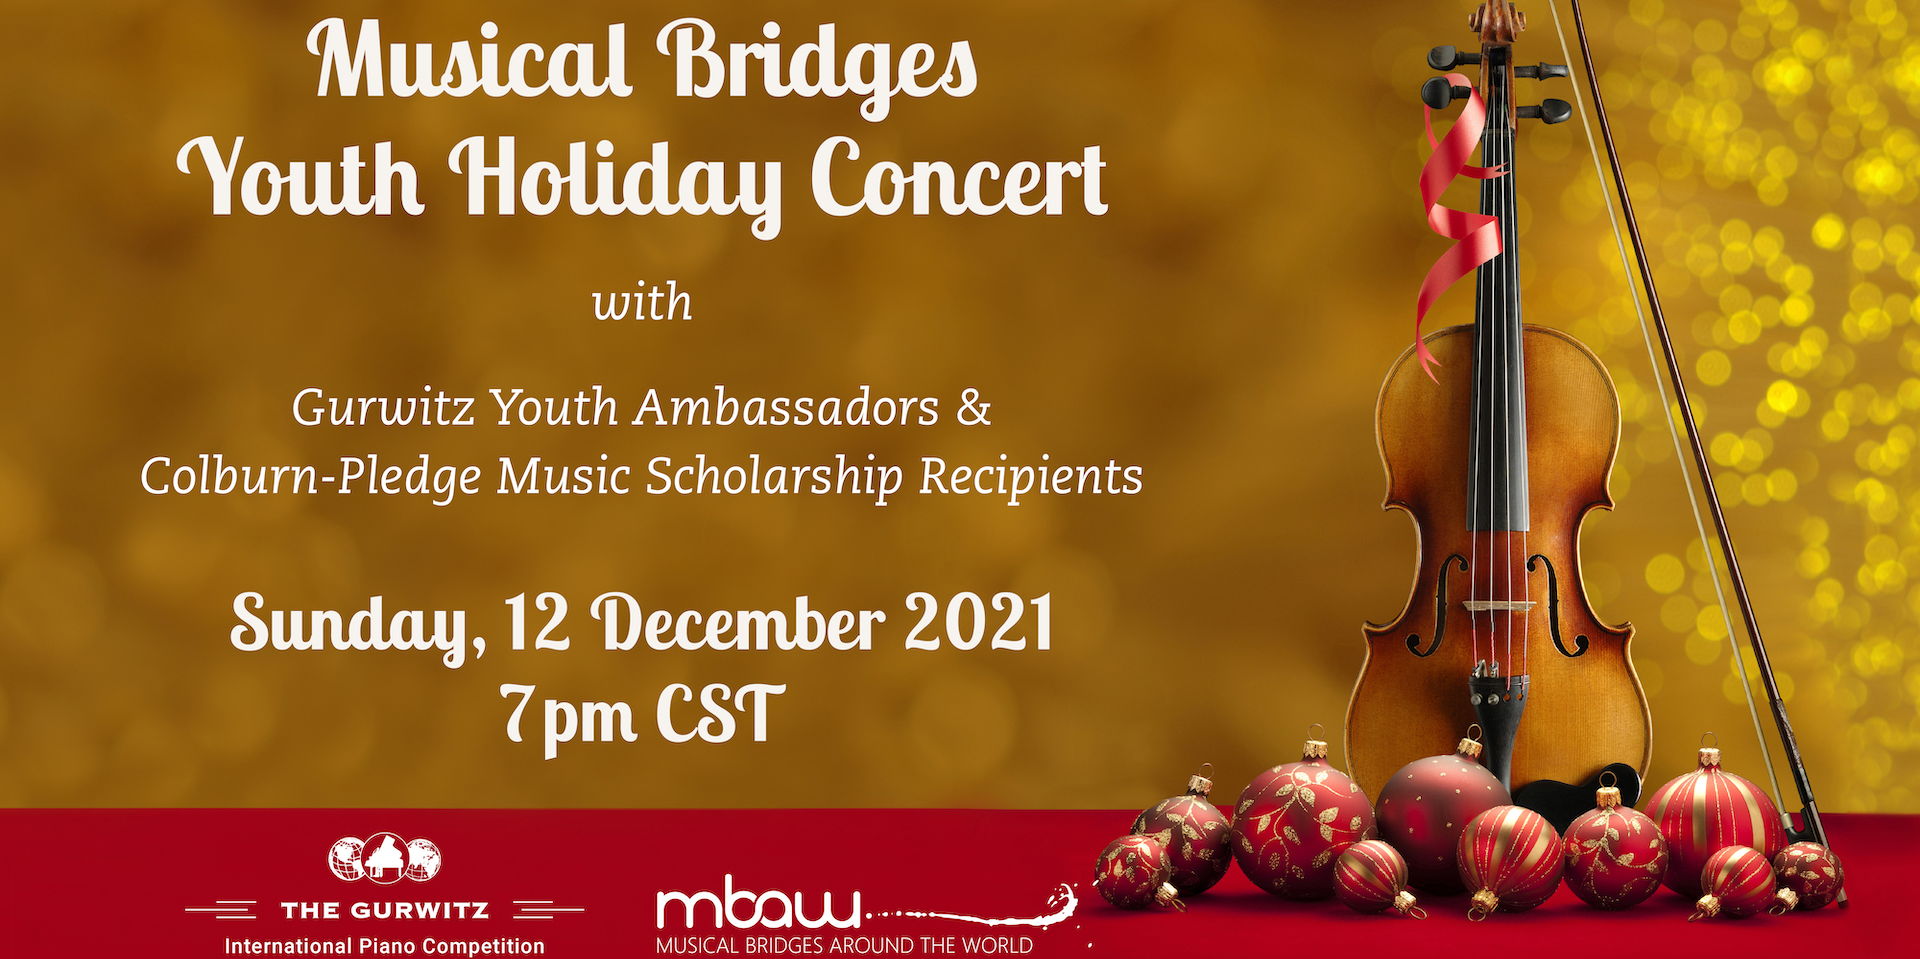 Musical Bridges Youth Holiday Concert promotional image